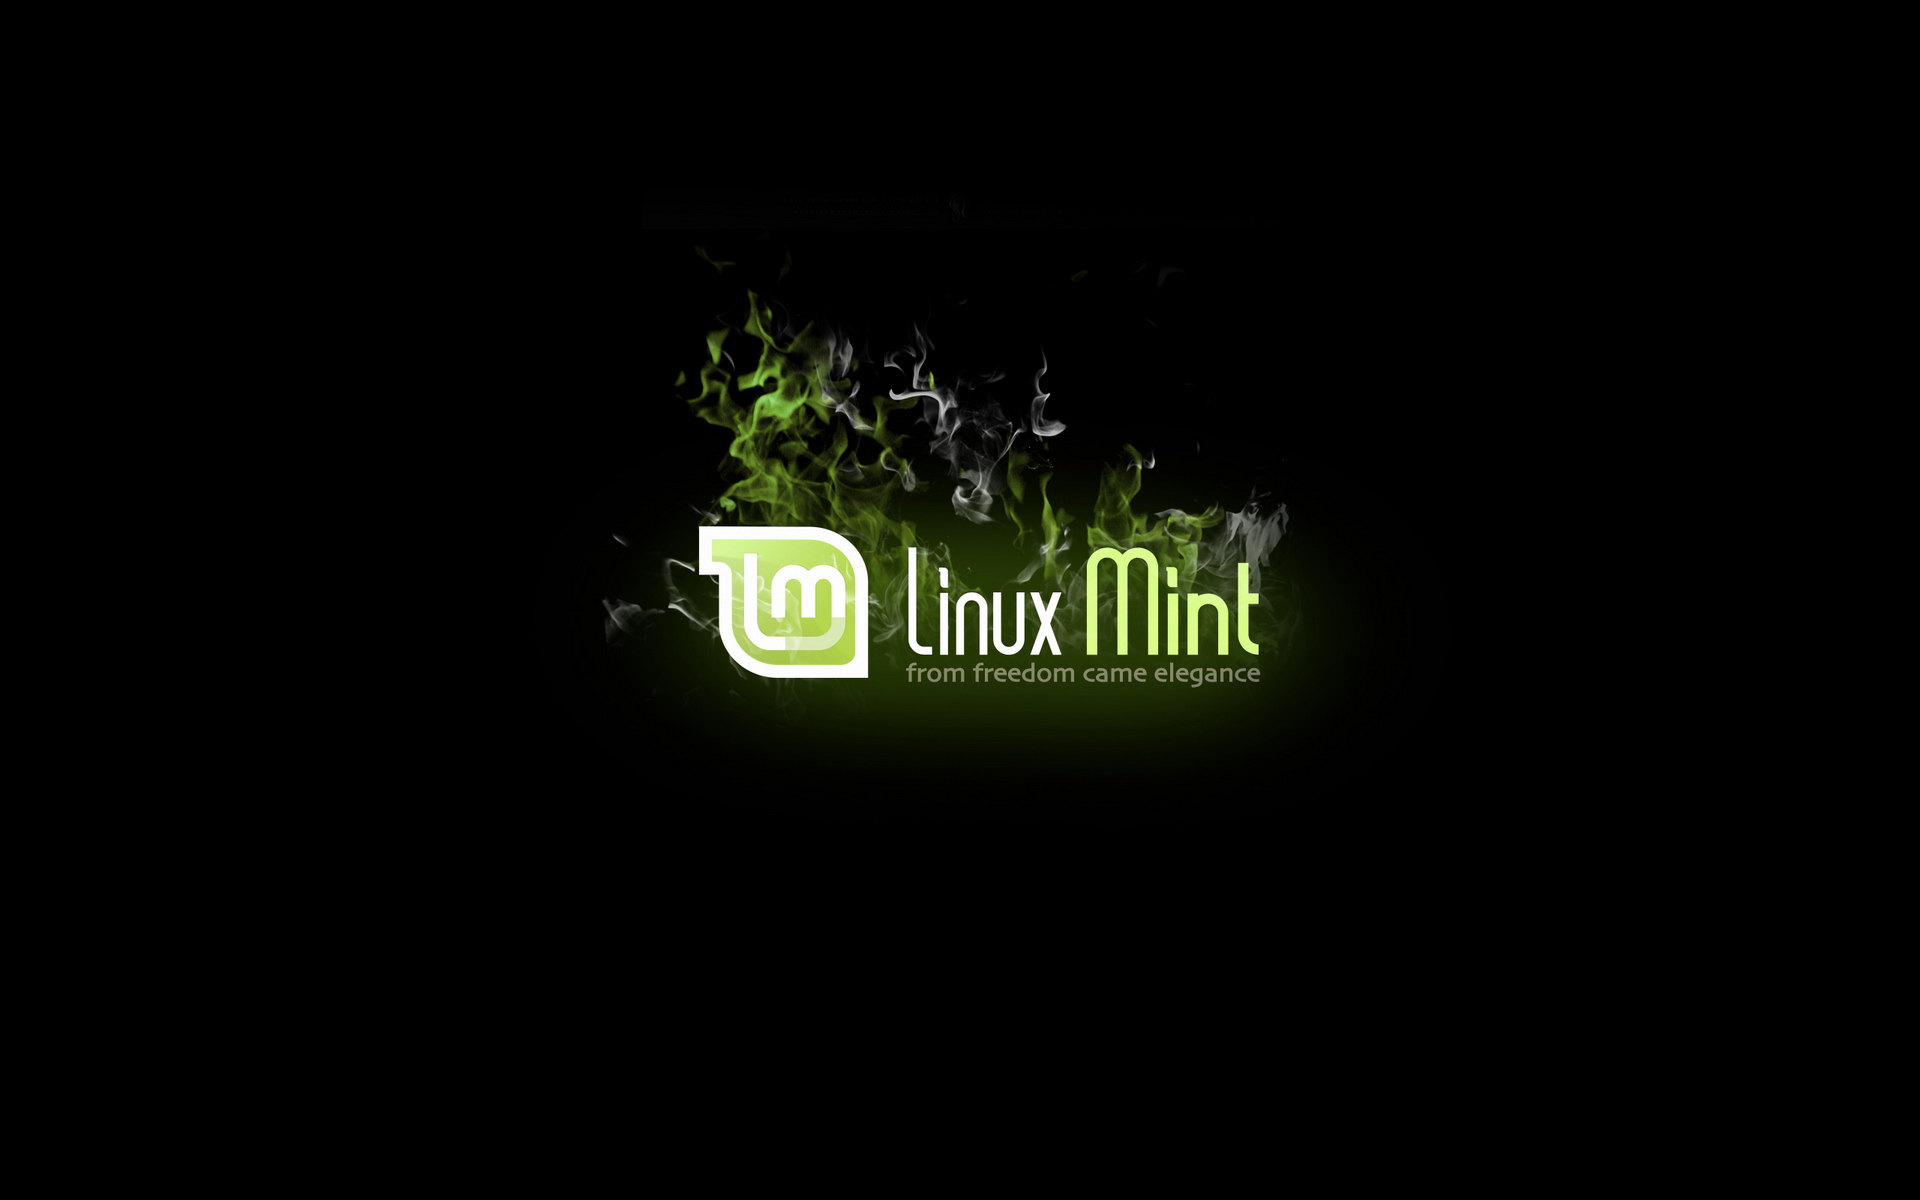 Top Linux Mint Wallpaper 1080p Image For